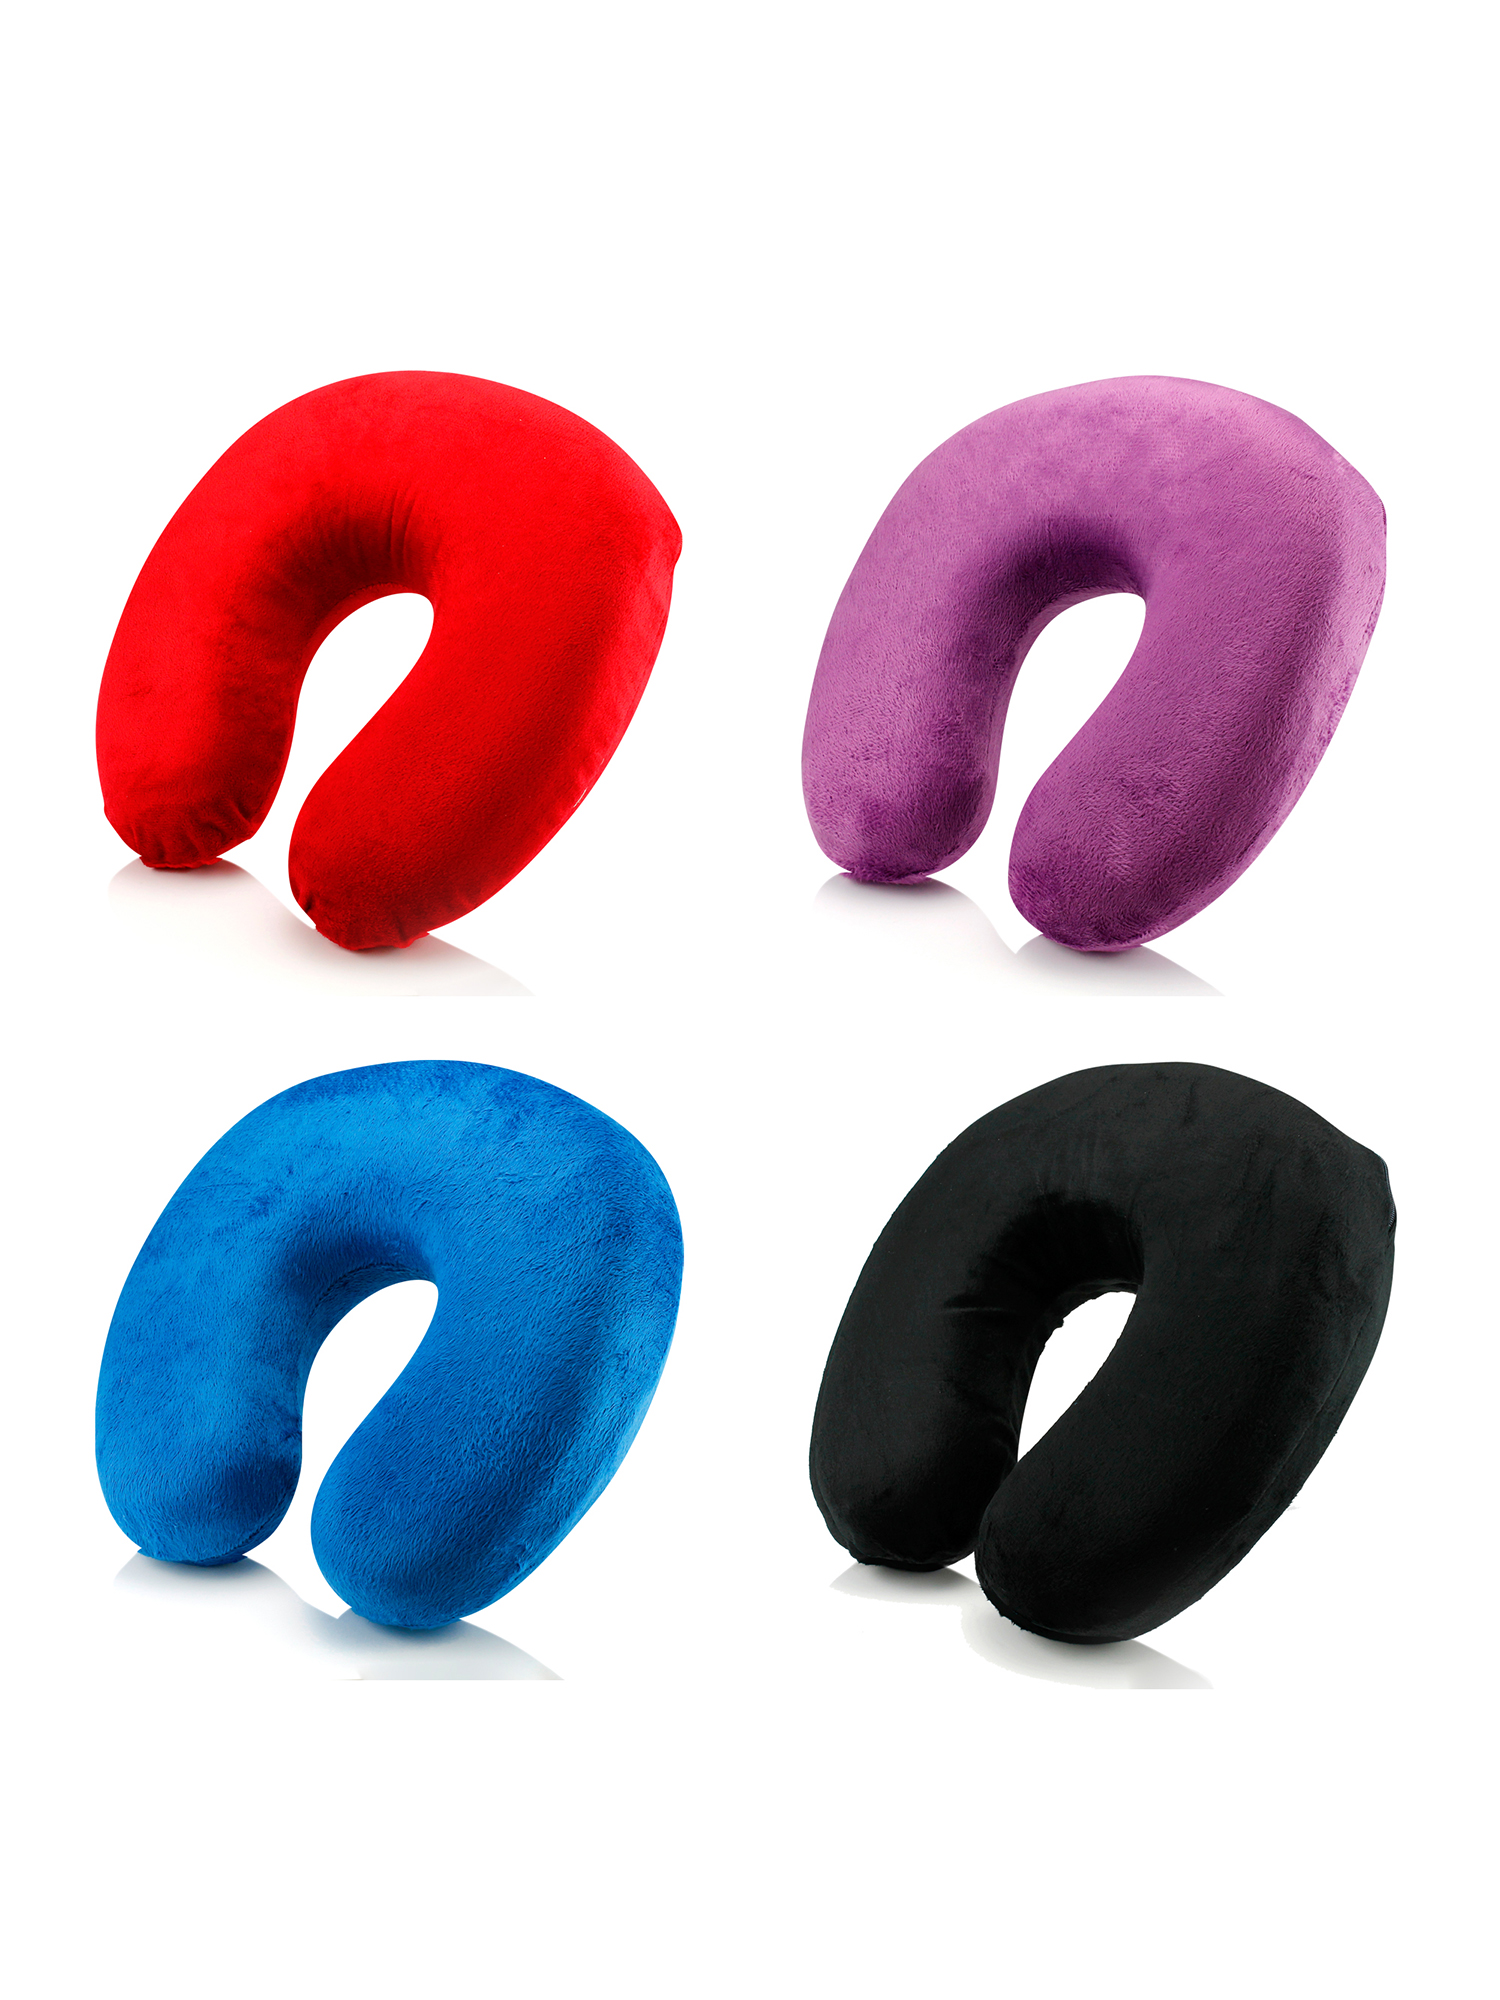 Travel Pillow Memory Foam Neck Cushion Support Rest Outdoors Car Flight - image 4 of 5